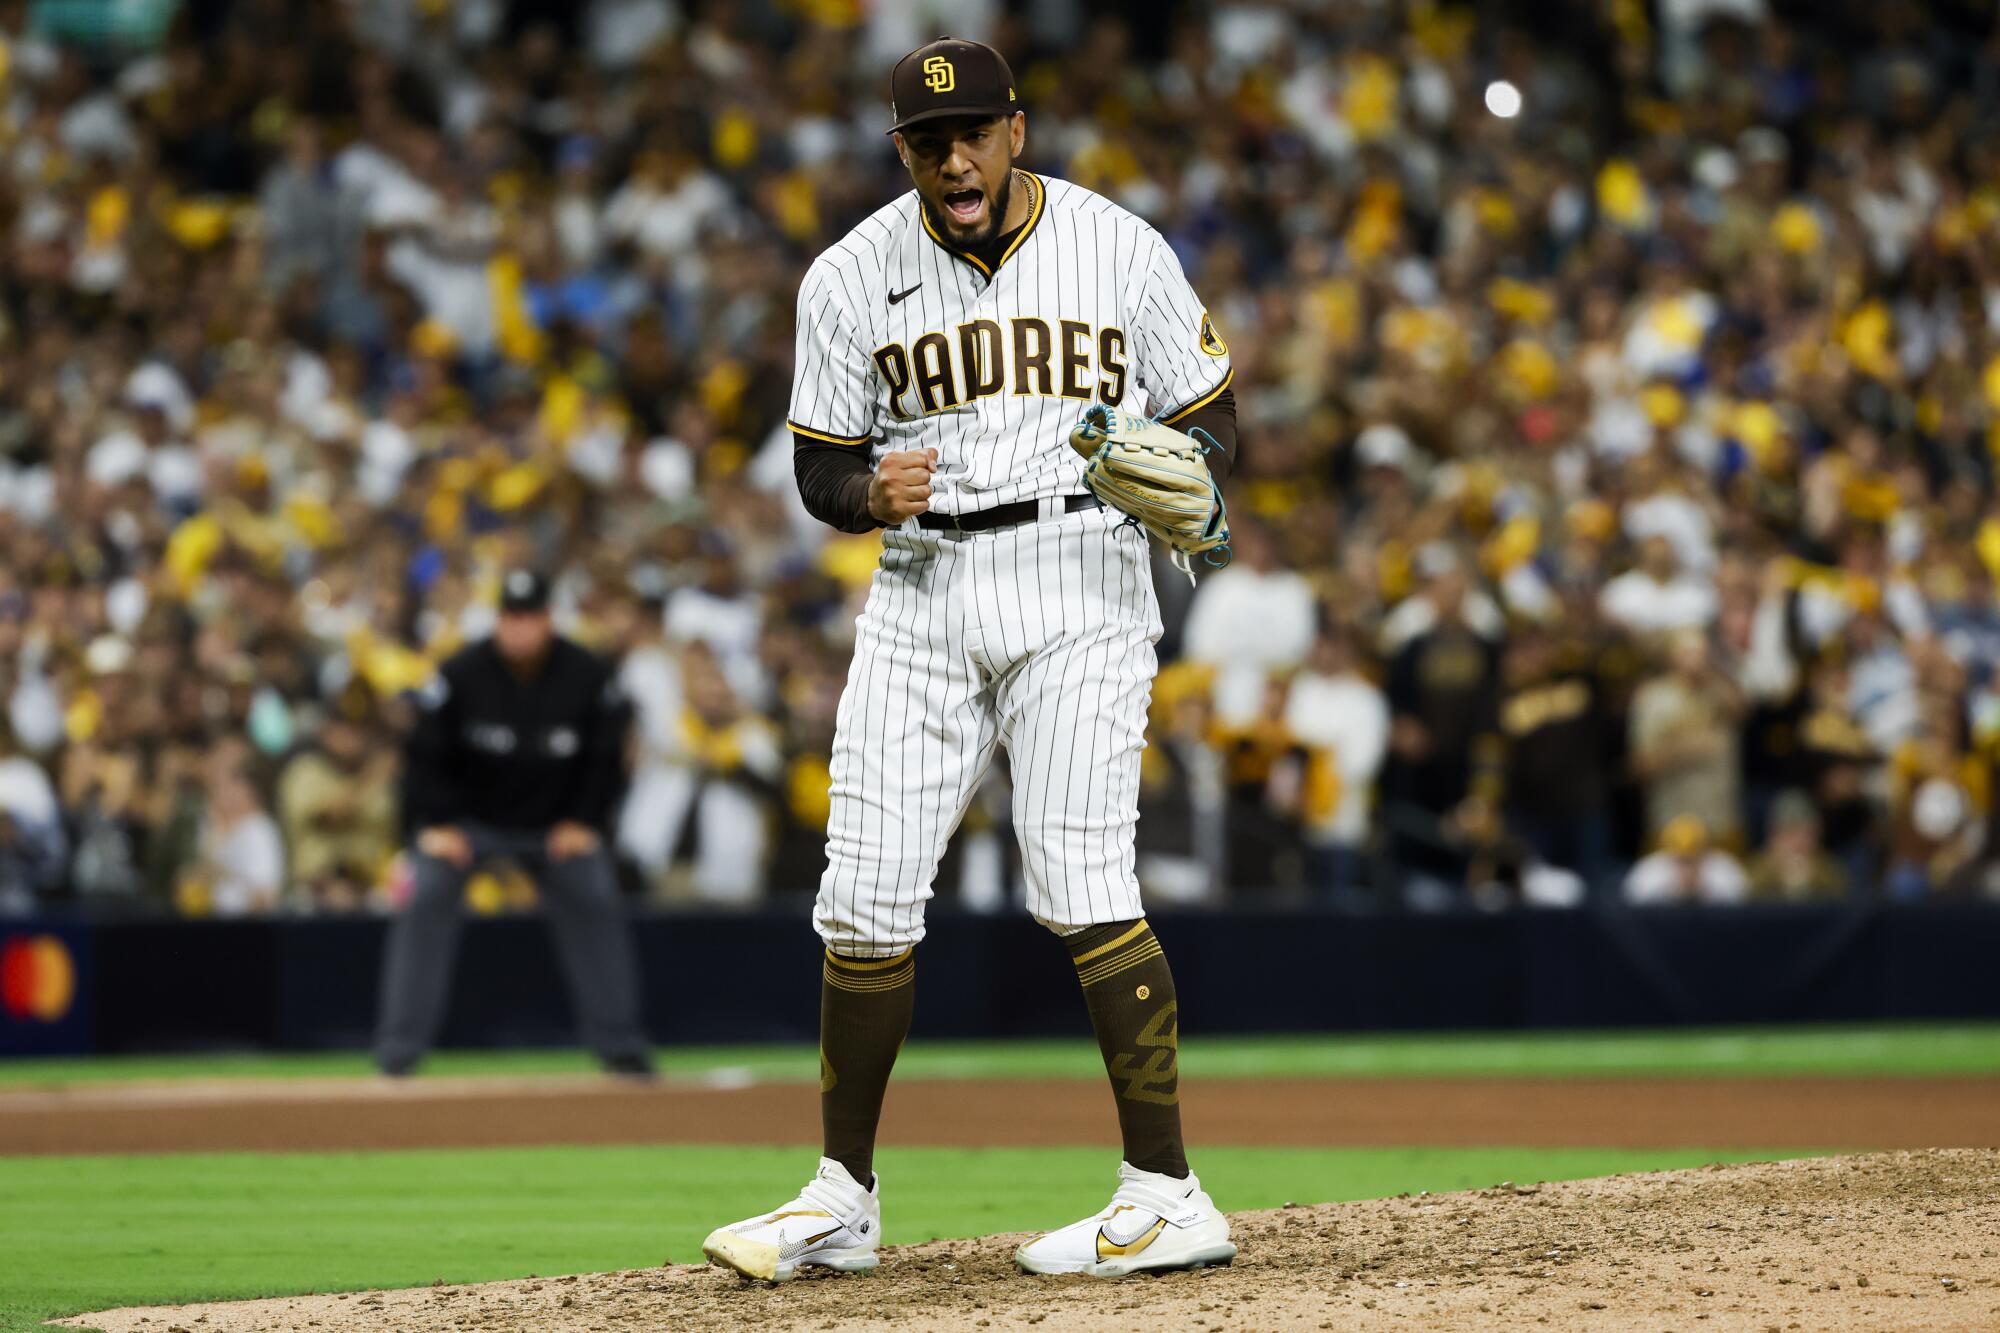 Padres Sign RHP Robert Suarez to One-Year Contract, by FriarWire